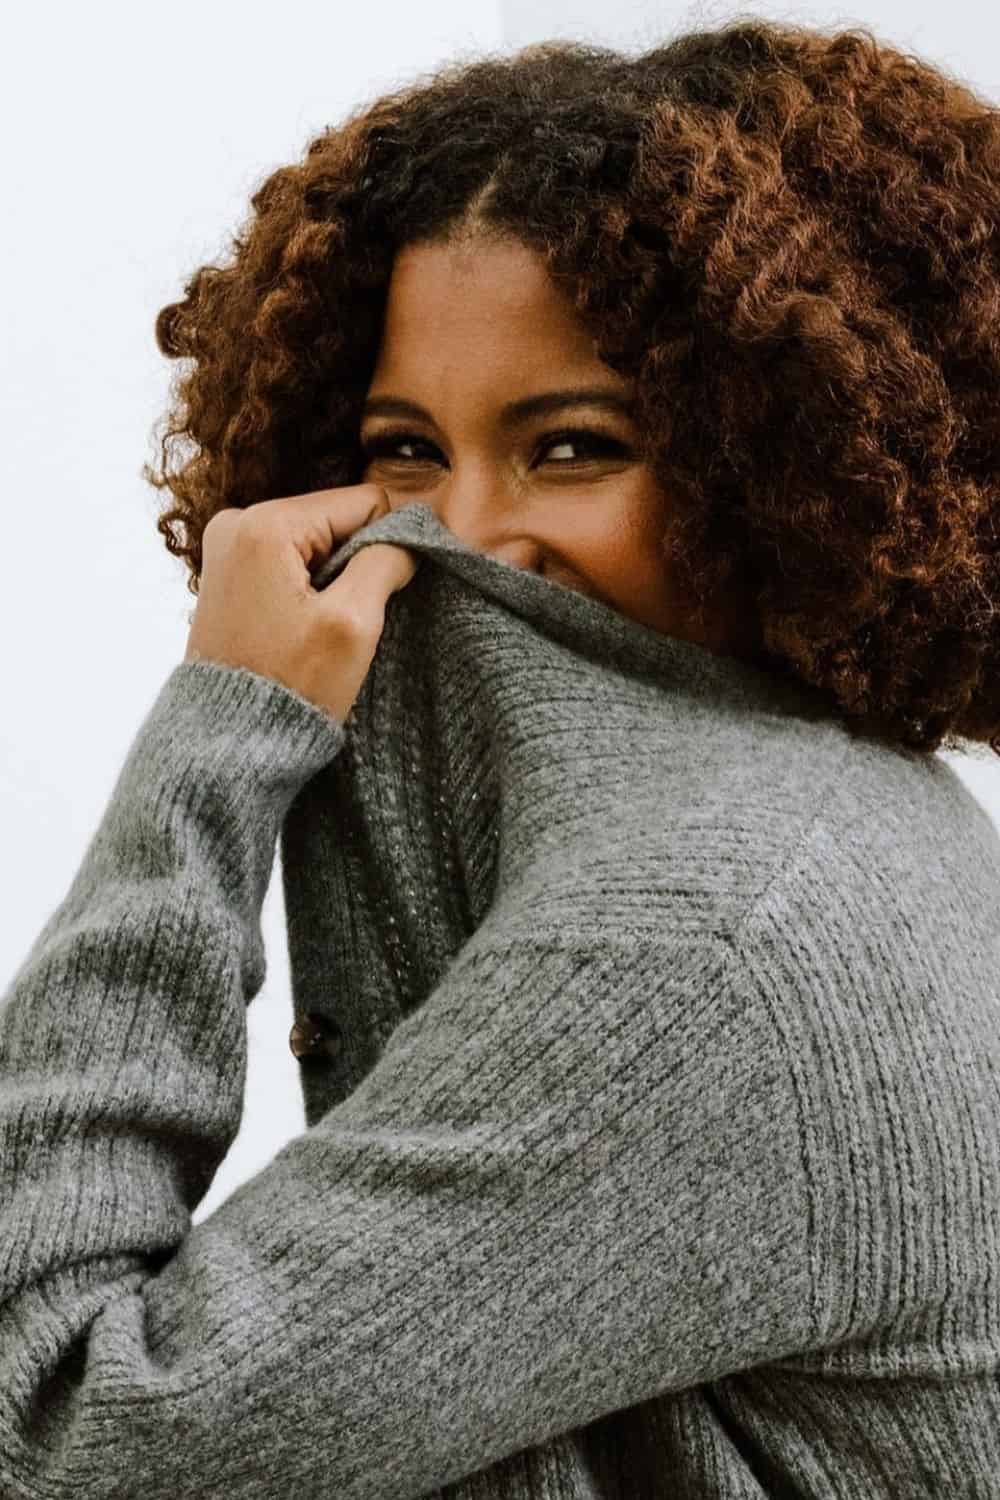 When chilly, blustery days come knocking, sweaters are essential to have. Knitted natural fabrics can warm your body, and fair trade sweaters can warm your body and your heart. Image by ABLE #fairtradesweaters #sustainablesweaters #sustainablejungle